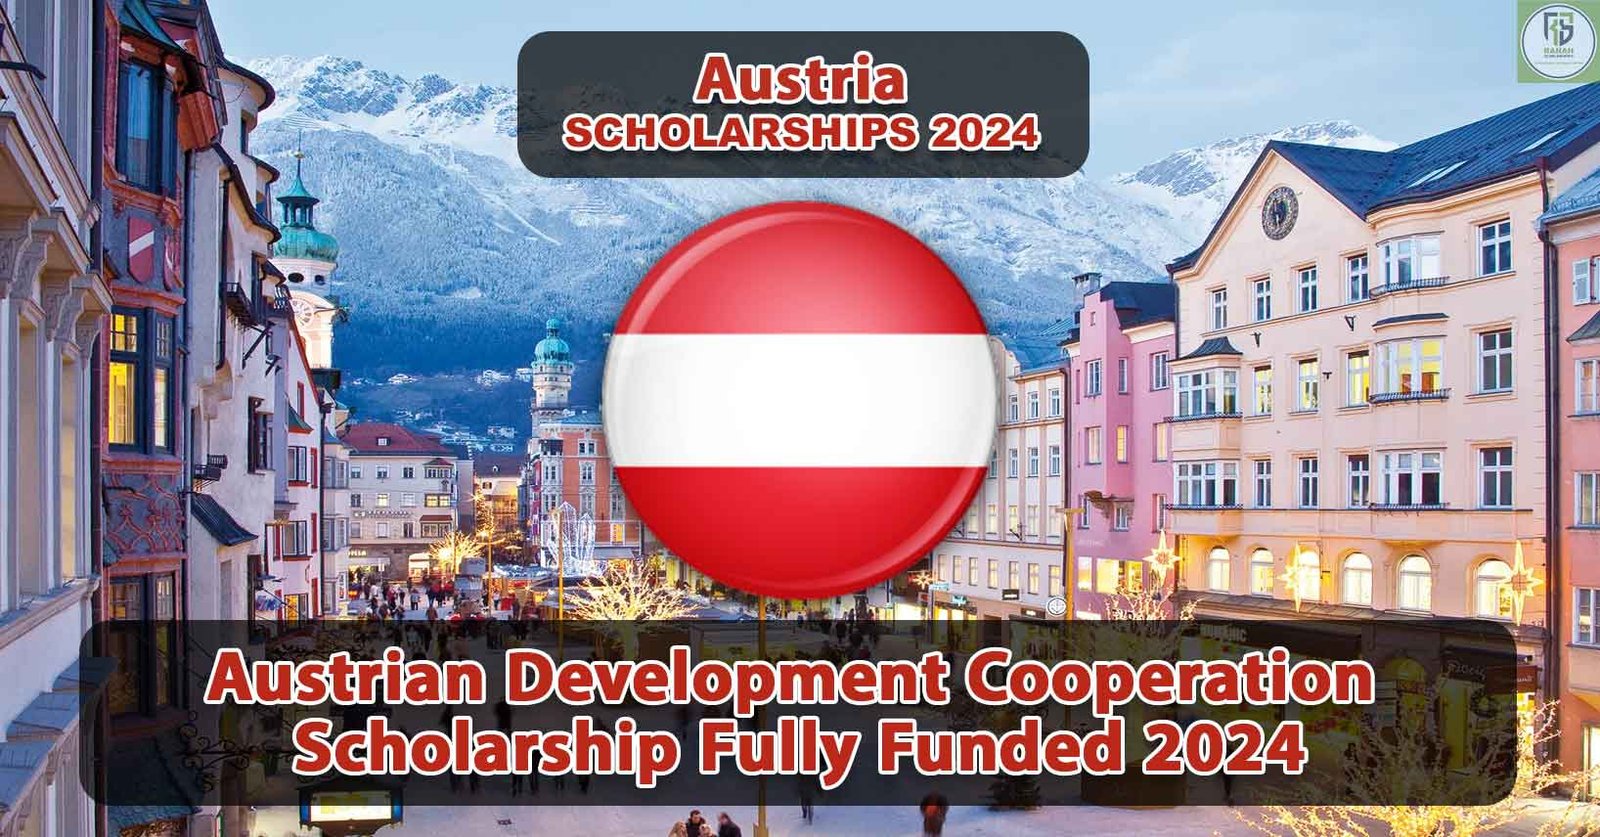 Austrian-Development-Cooperation-Scholarship-Fully-Funded-2024